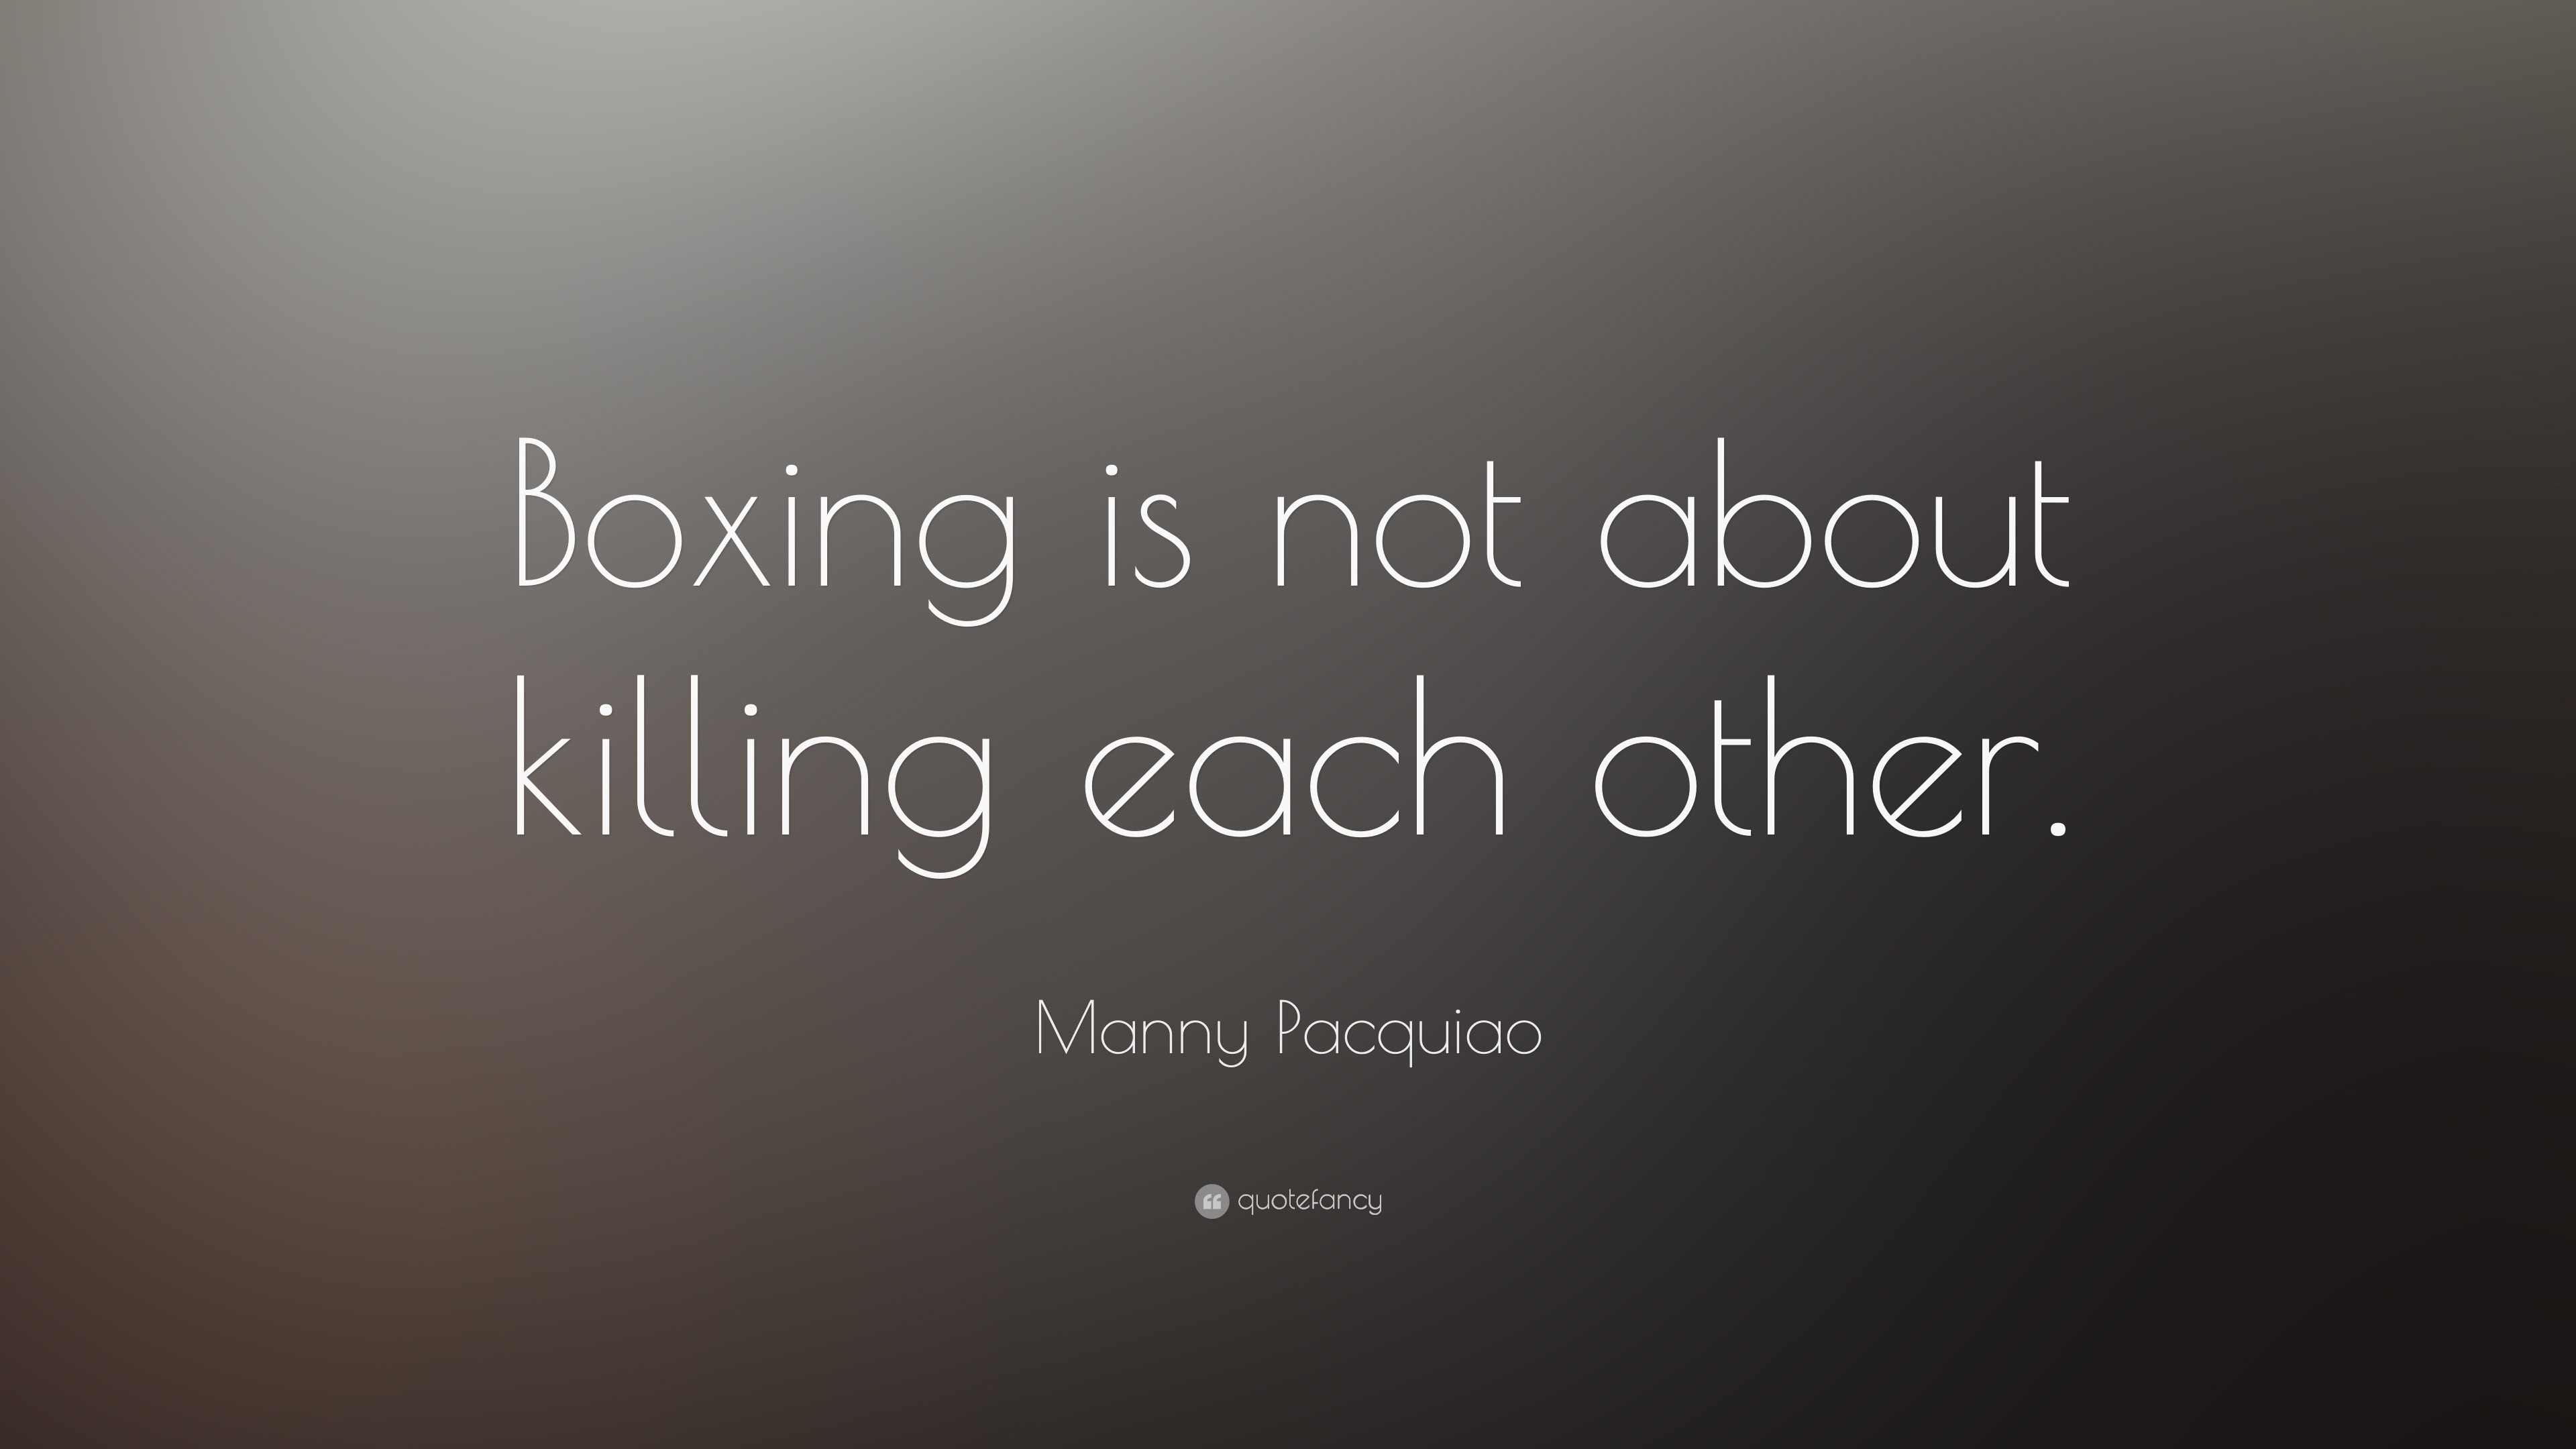 3840x2160  Manny Pacquiao Quote: “Boxing is not about killing each other.”